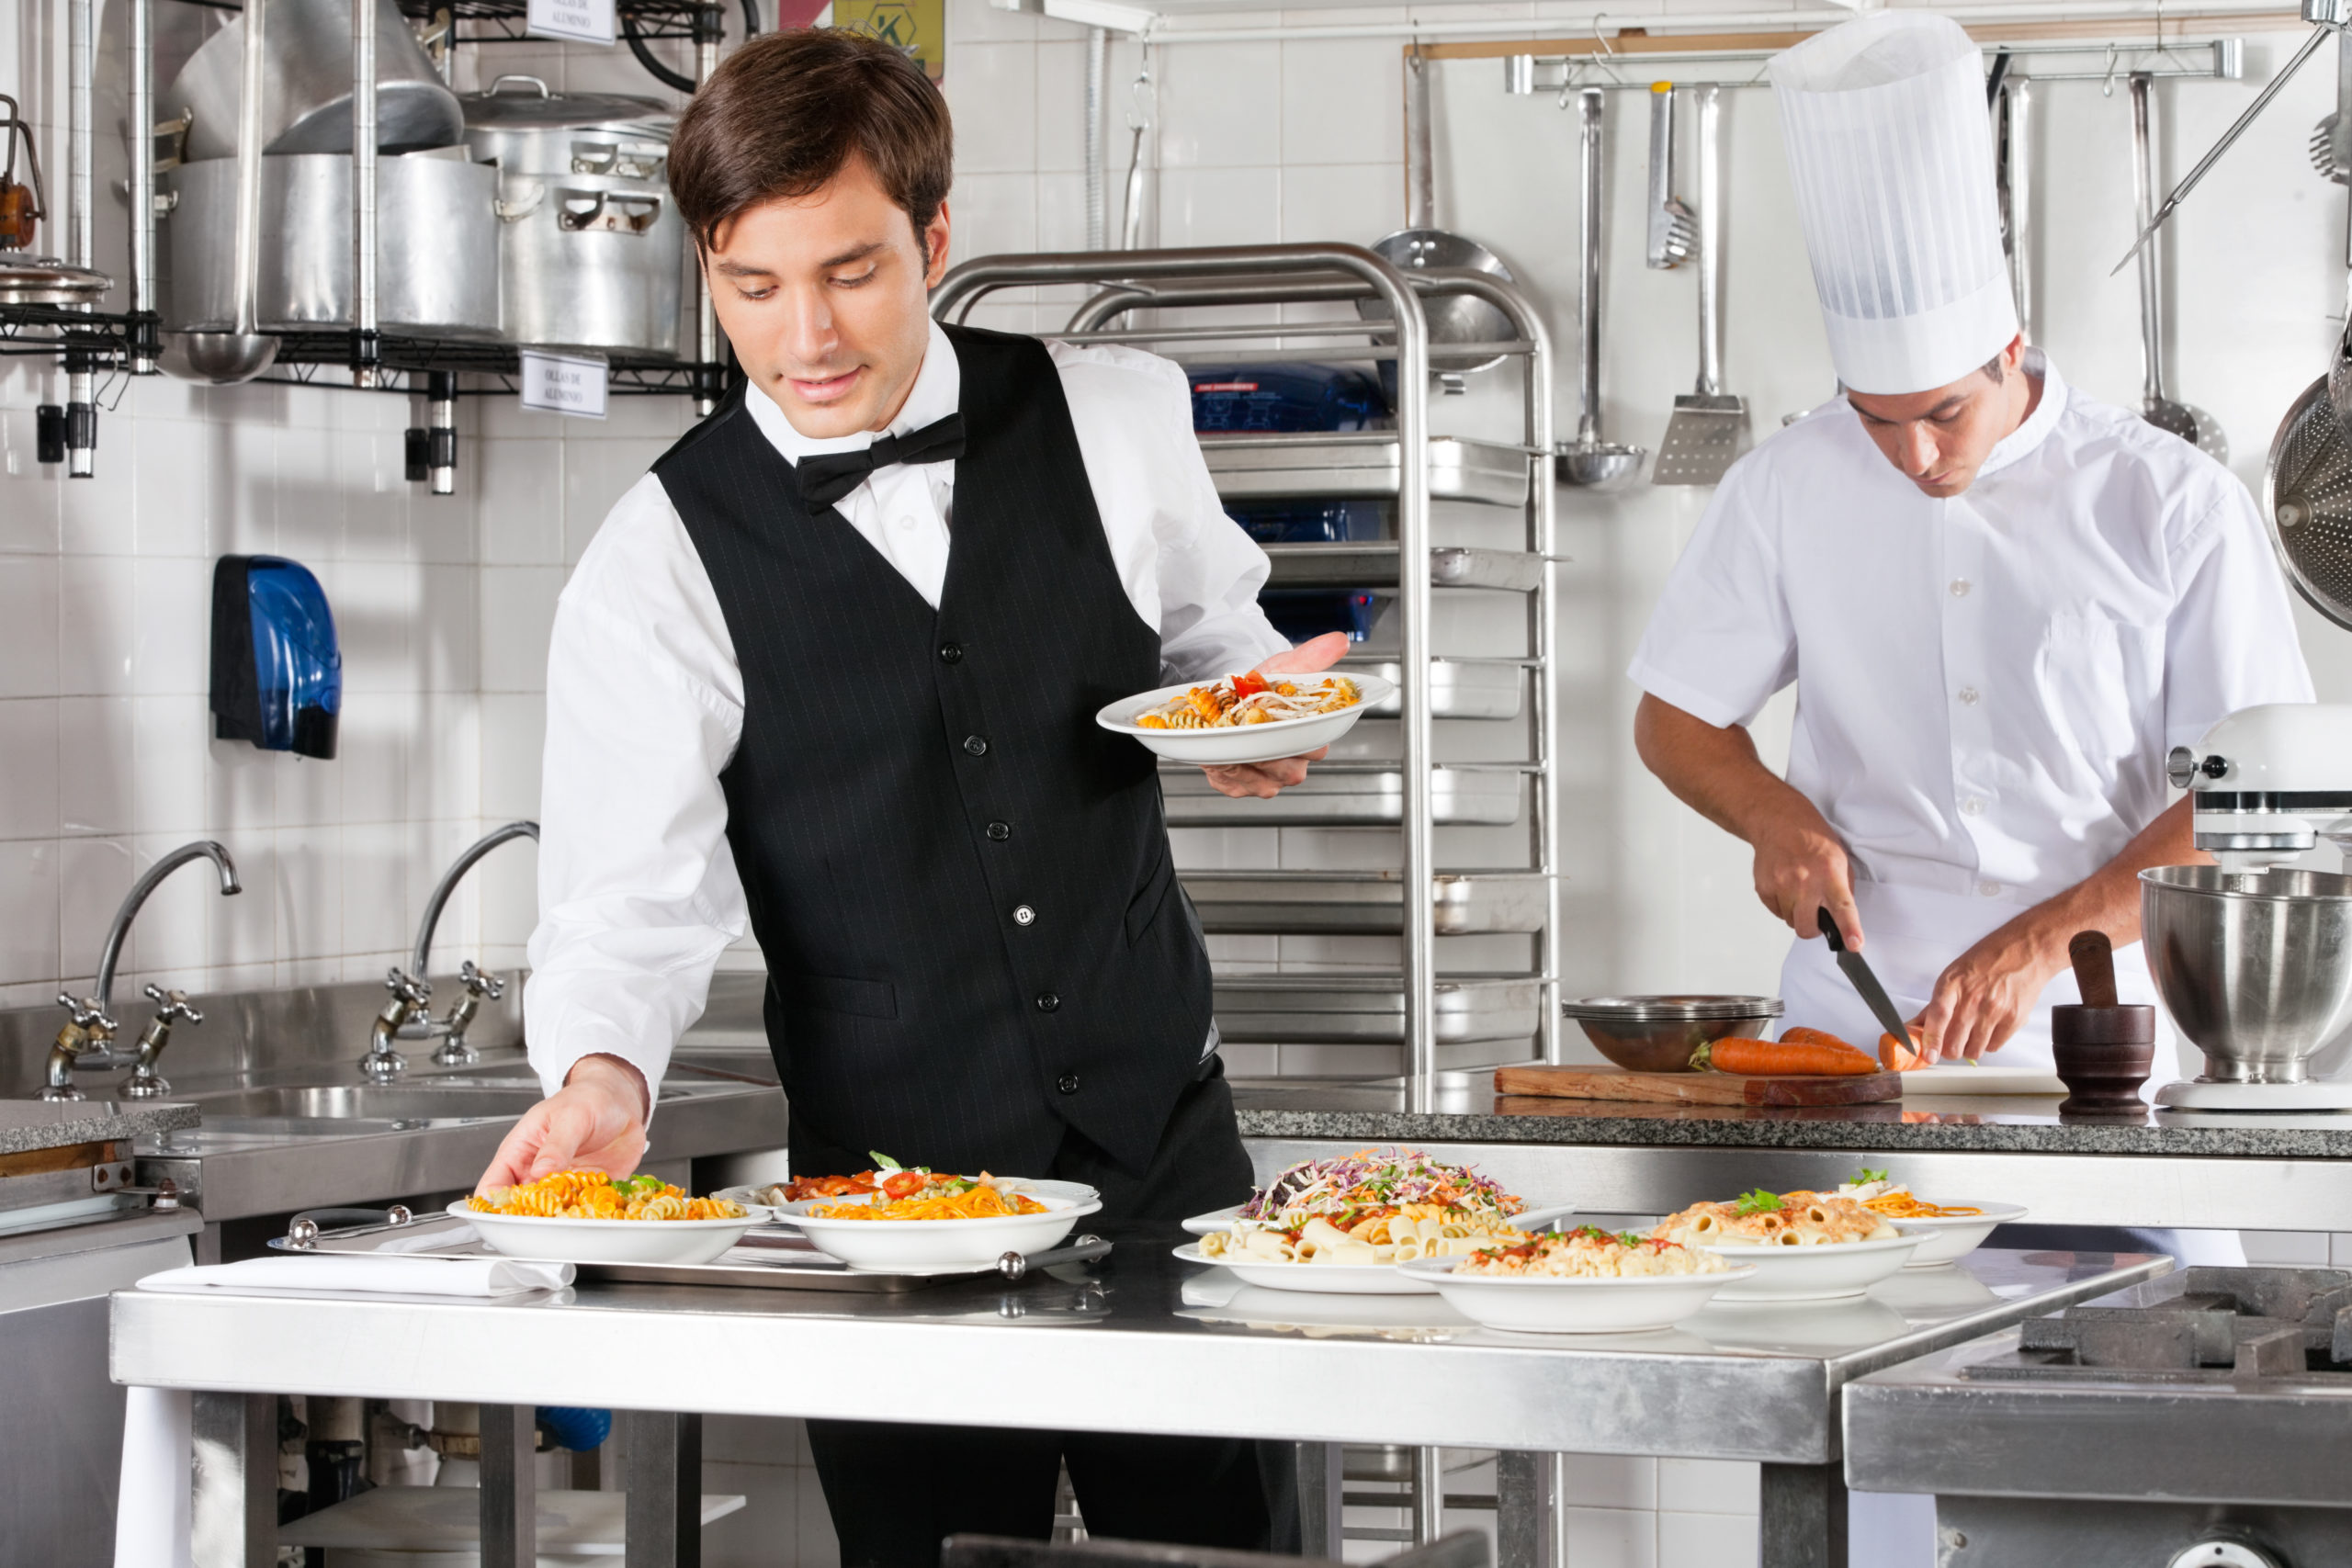 Waiter And Chef Working In Commercial Kitchen